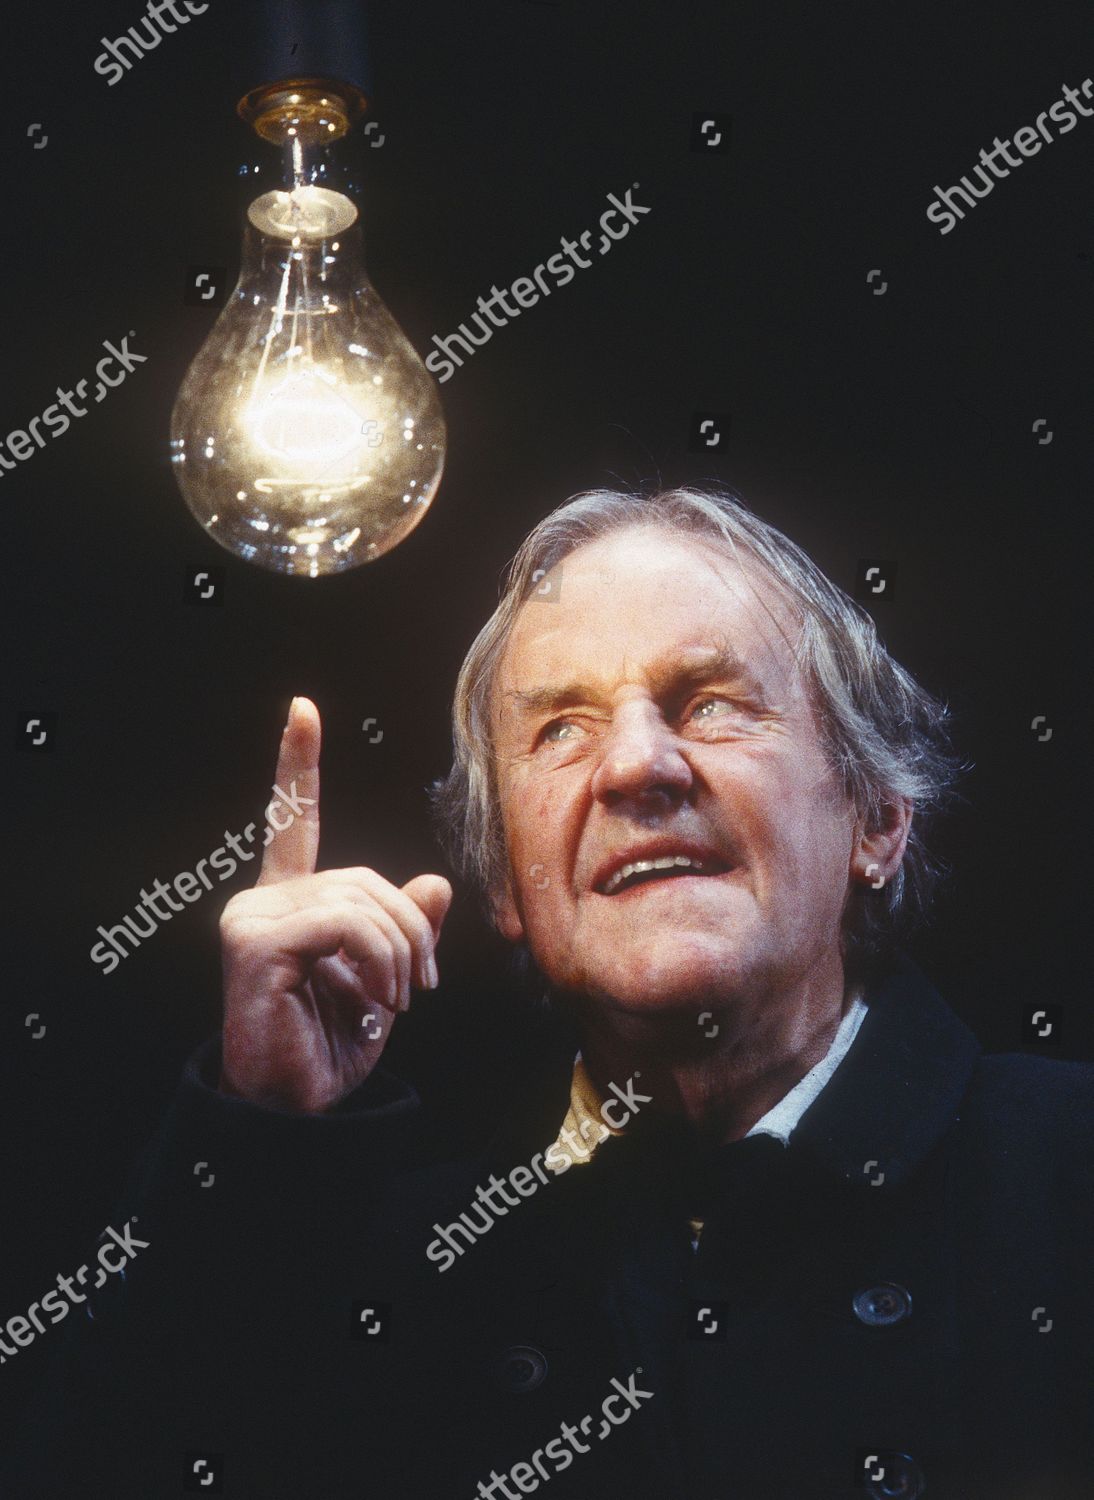 Richard Briers Editorial Stock Photo Stock Image Shutterstock